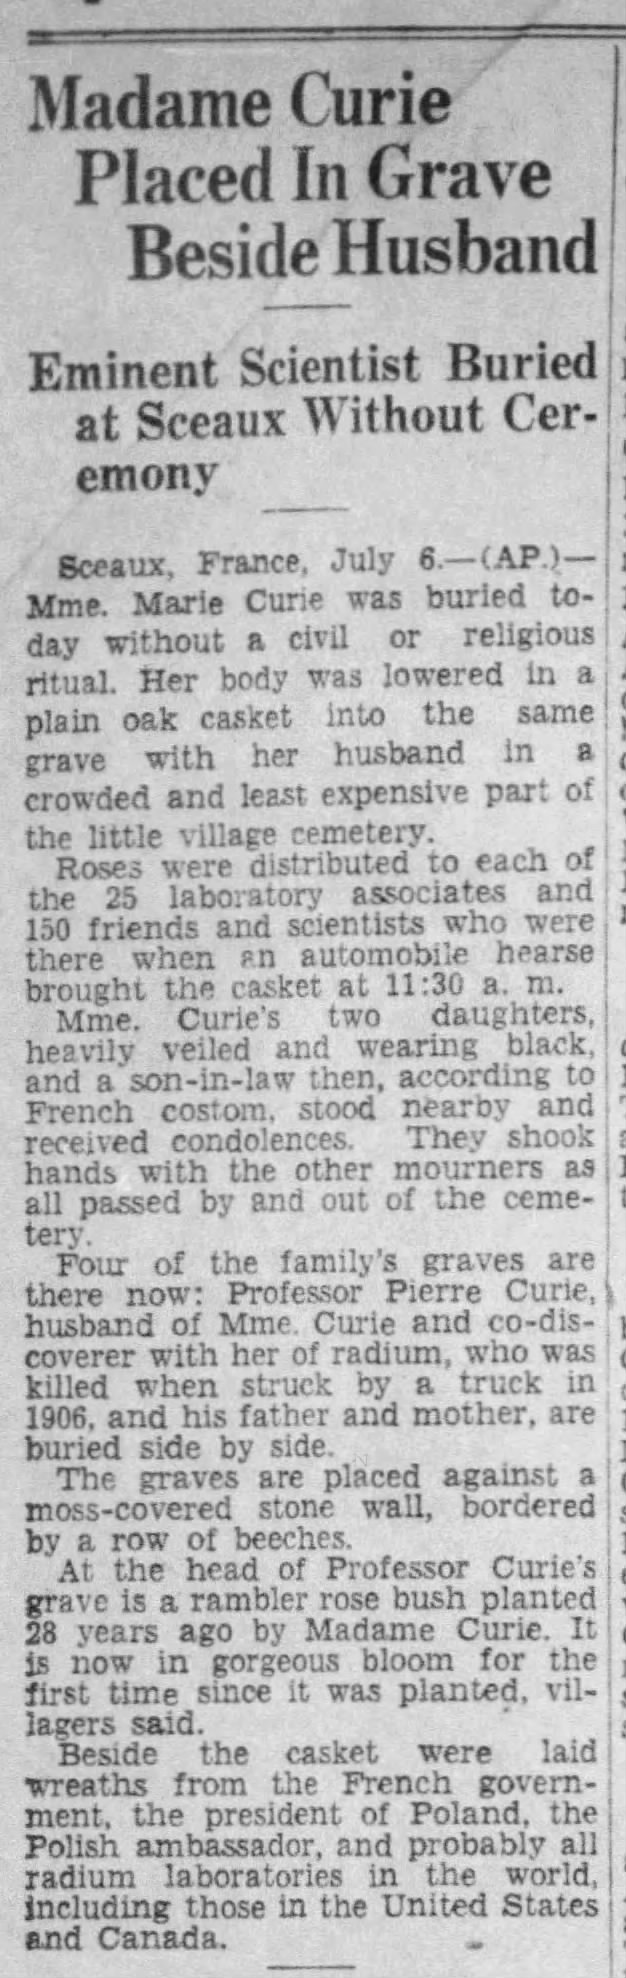 Newspaper account of Marie Curie's funeral in July 1934